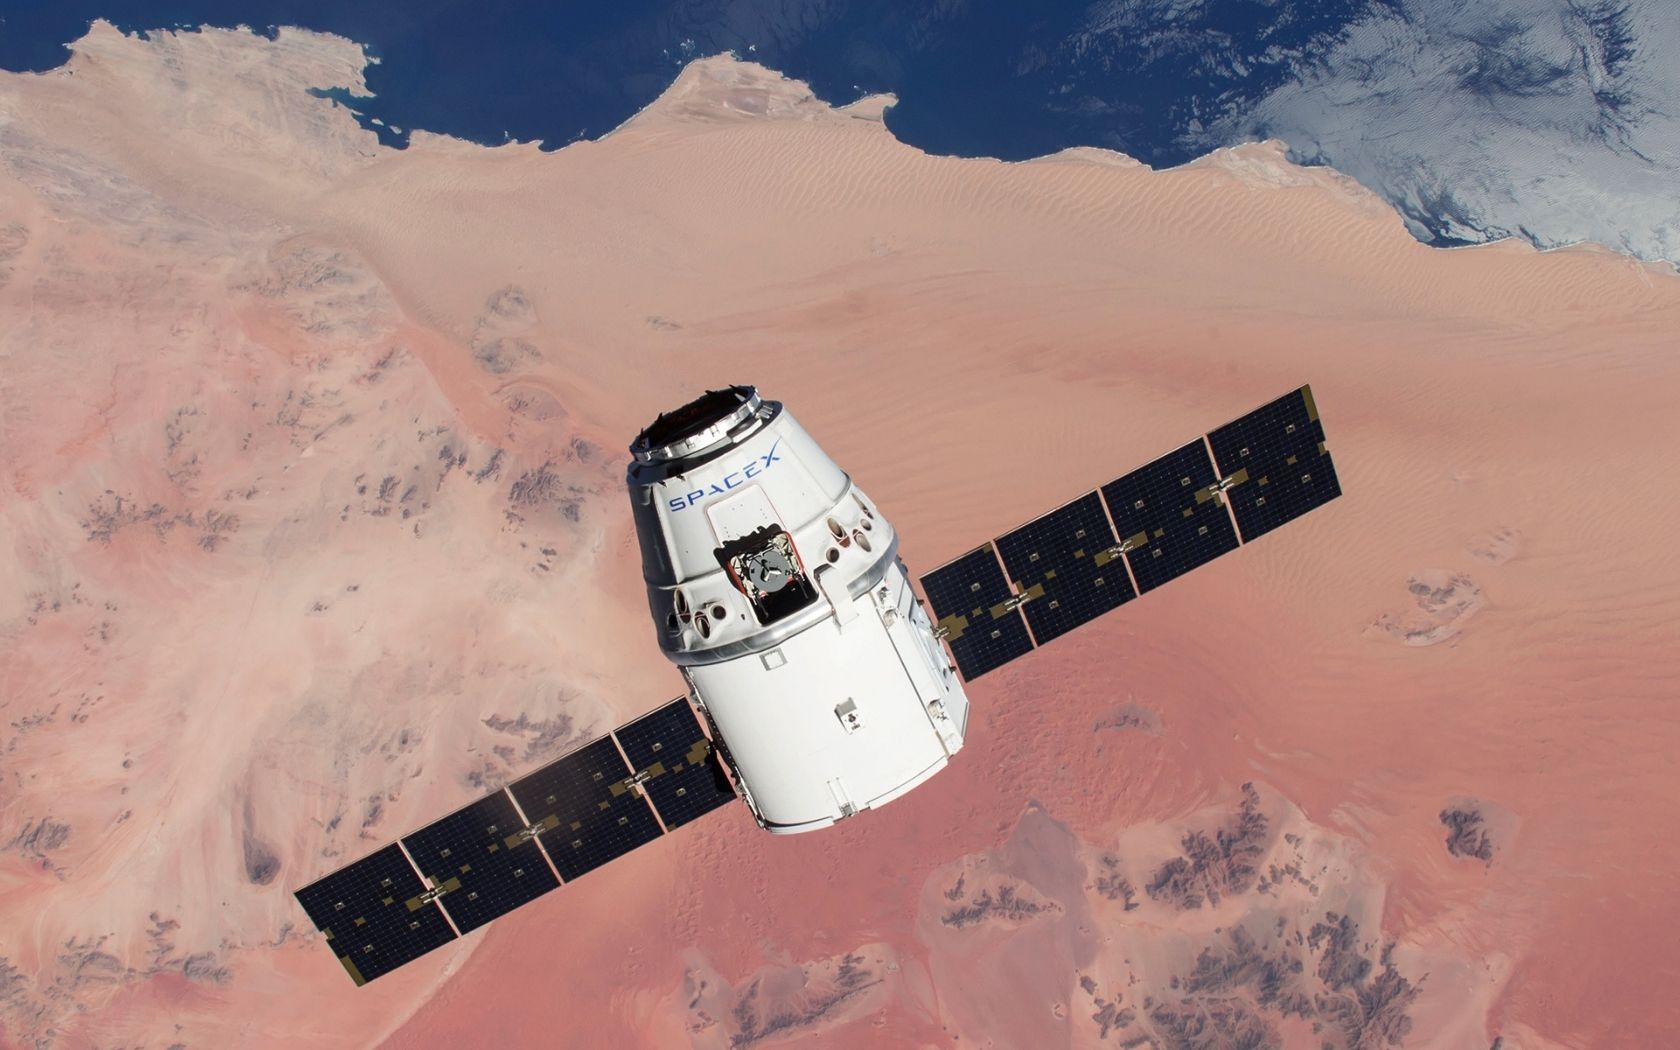 SpaceX Dragon Capsule in orbit around Earth